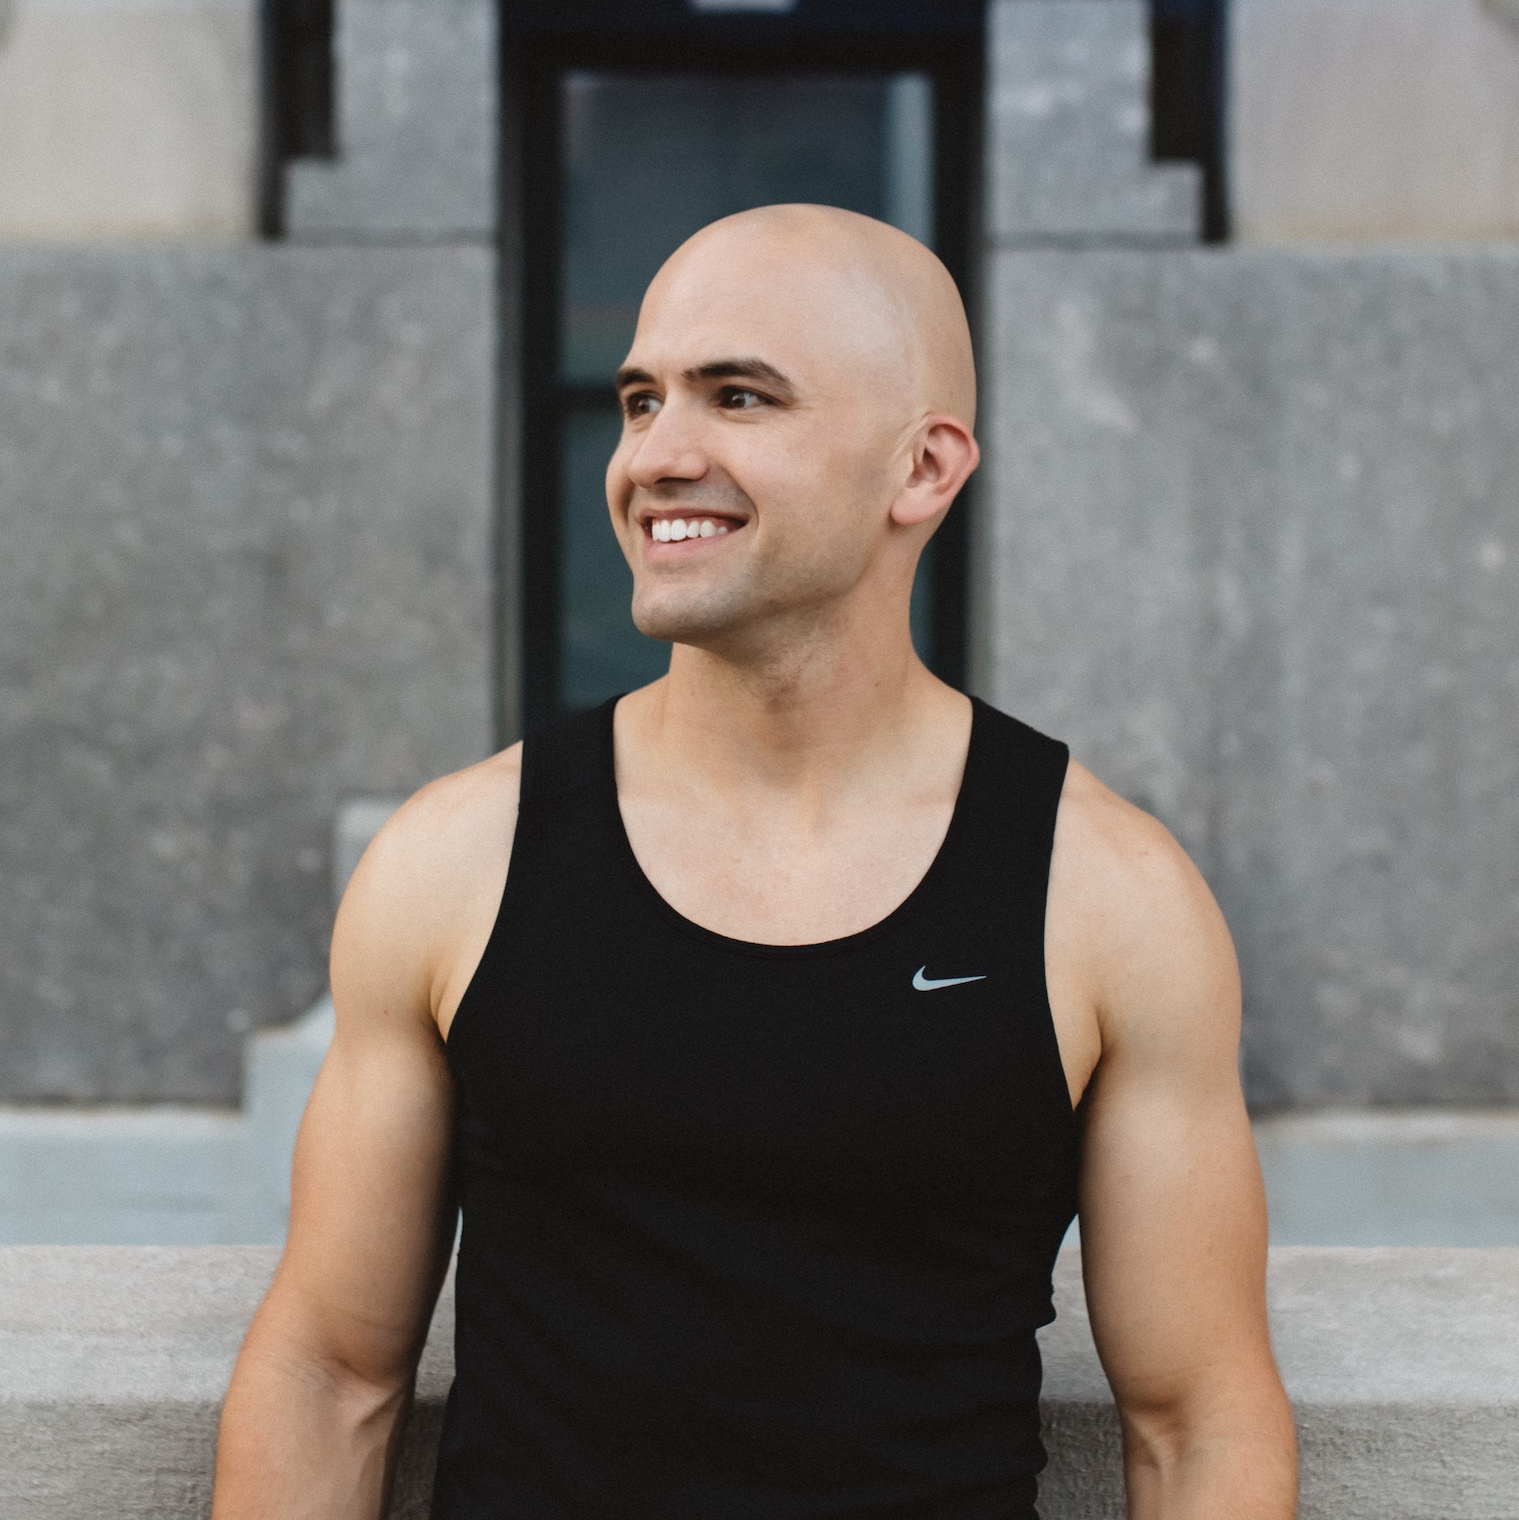 656, 2, 2019-05-07 11:20:24, 2019-05-07 18:20:24, MIchael Ashford, Certified Personal Trainer, MIchael Ashford, Certified Personal Trainer, MIchael Ashford, Certified Personal Trainer, inherit, closed, closed, , michael-ashford-sq-1, , , 2019-05-14 14:46:51, 2019-05-14 21:46:51, , 655, https://highwaytohealth.show/wp-content/uploads/2019/05/MIchael-Ashford-sq-1.jpg, 0, attachment, image/jpeg, 0, and 656